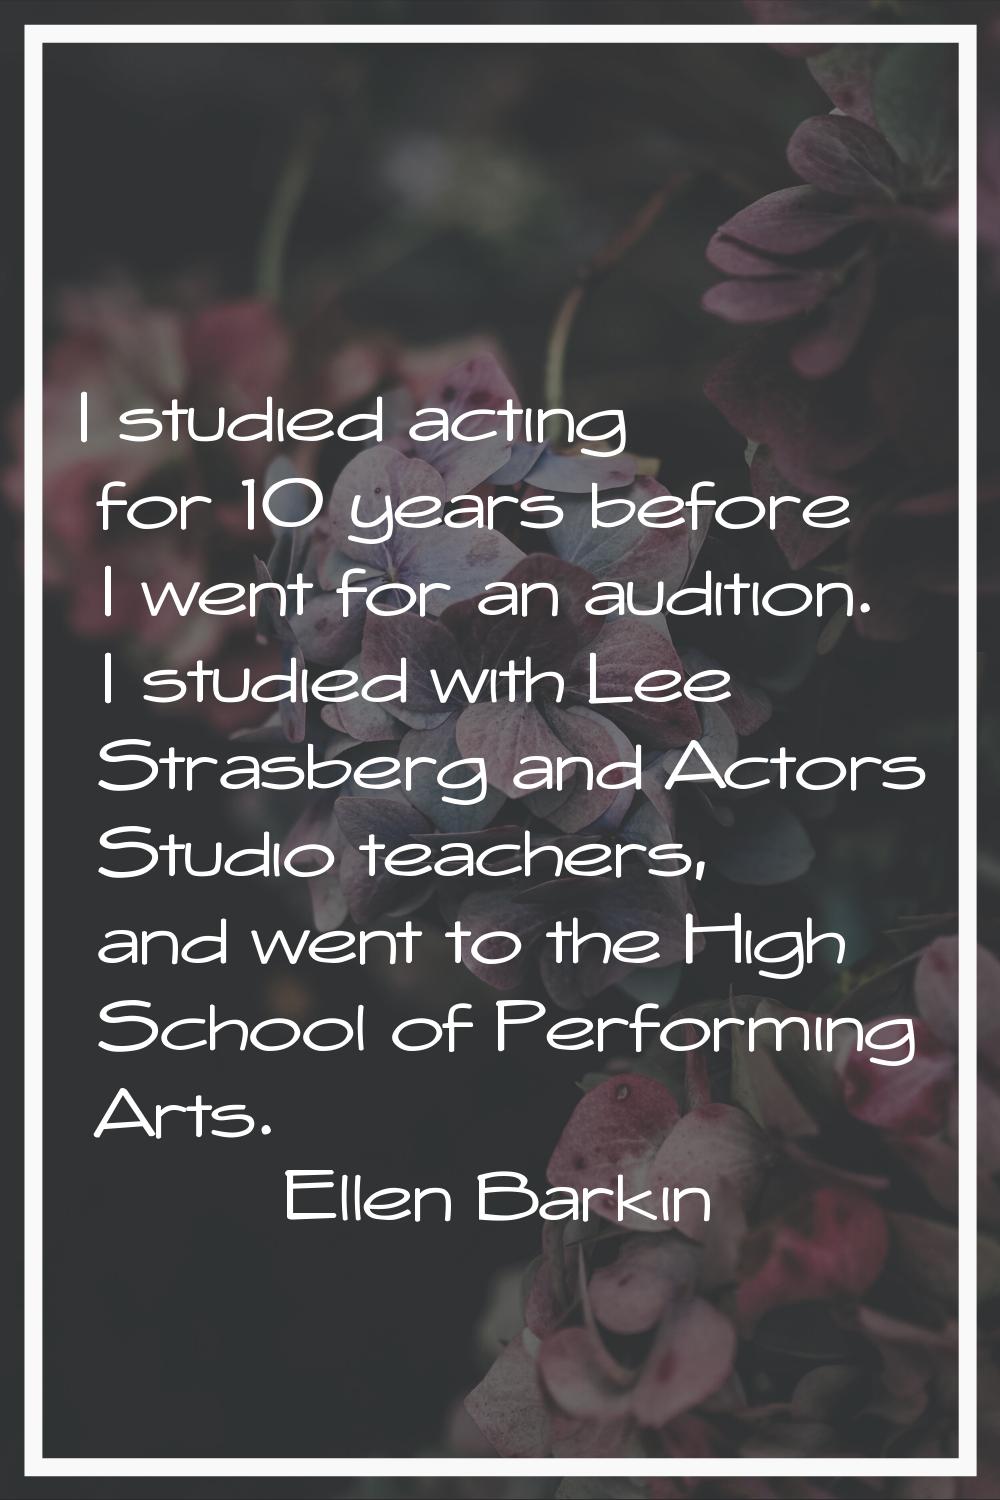 I studied acting for 10 years before I went for an audition. I studied with Lee Strasberg and Actor